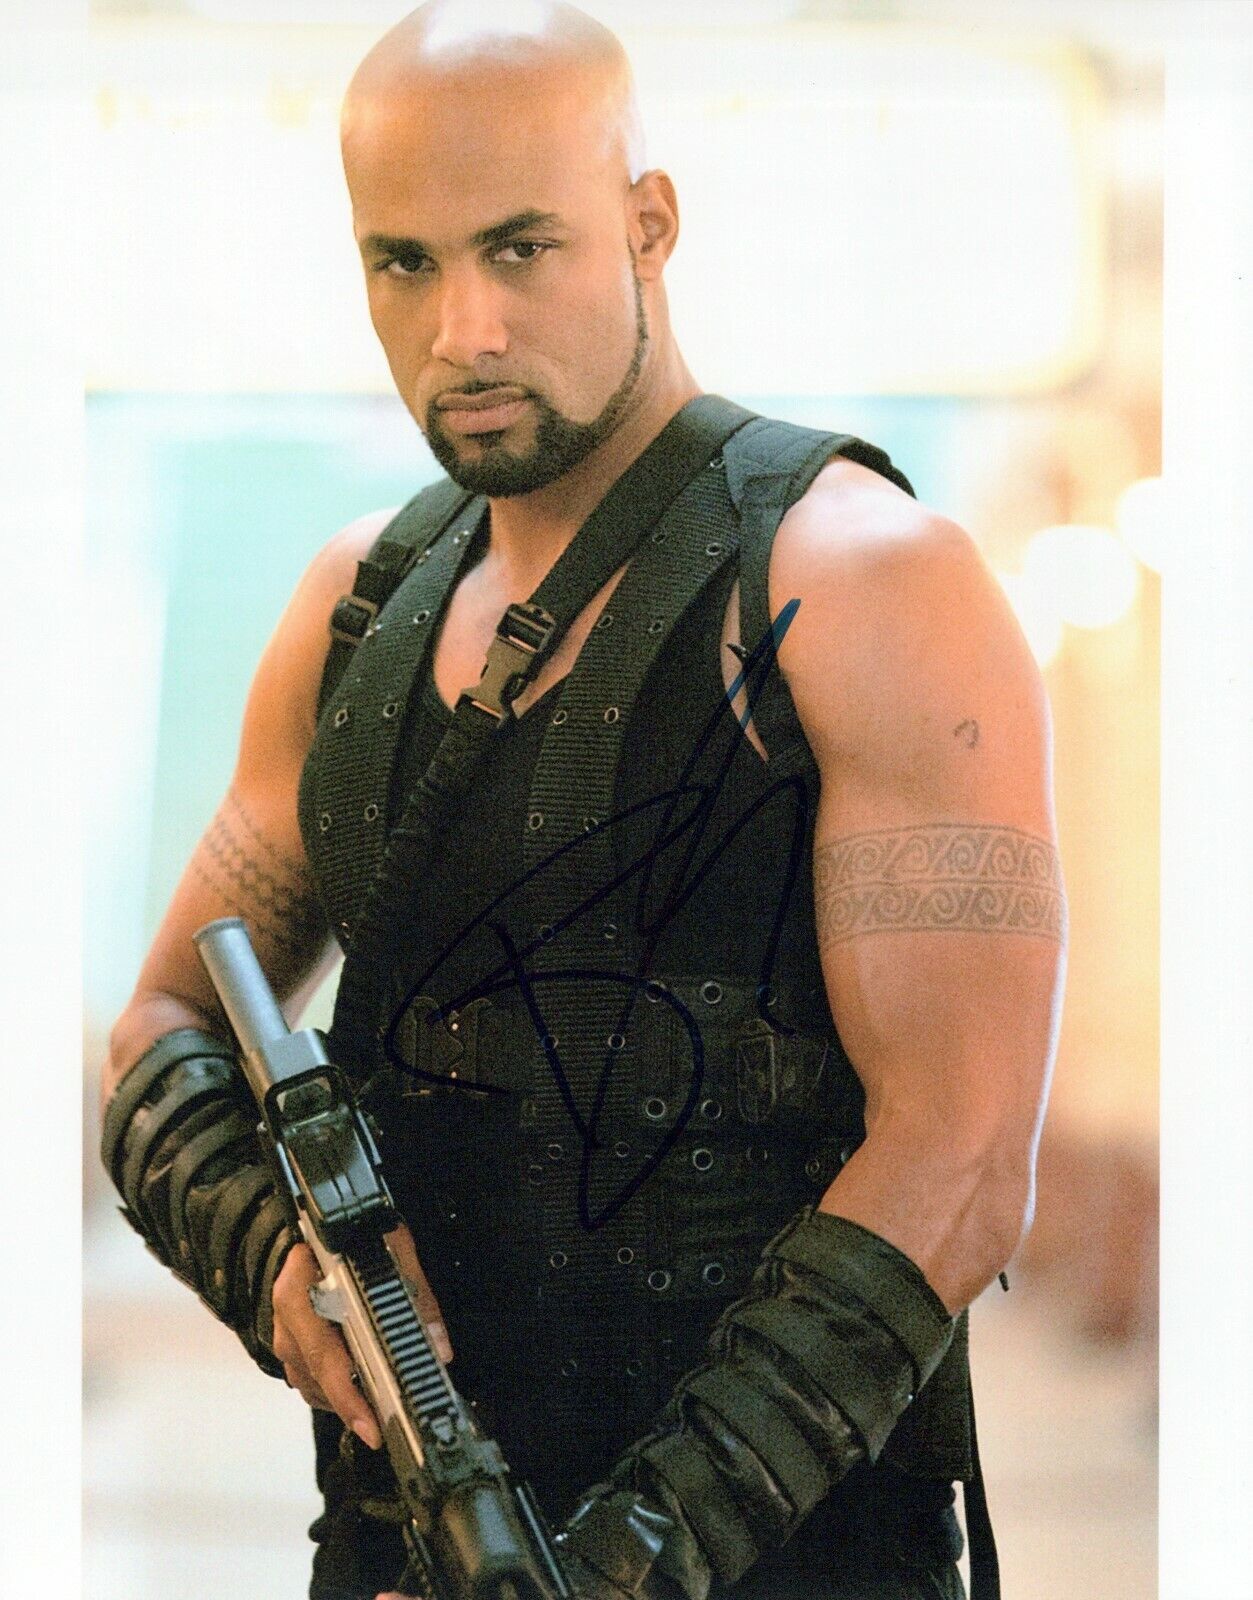 Boris Kodjoe Resident Evil Afterlife autographed Photo Poster painting signed 8x10 #9 Luther